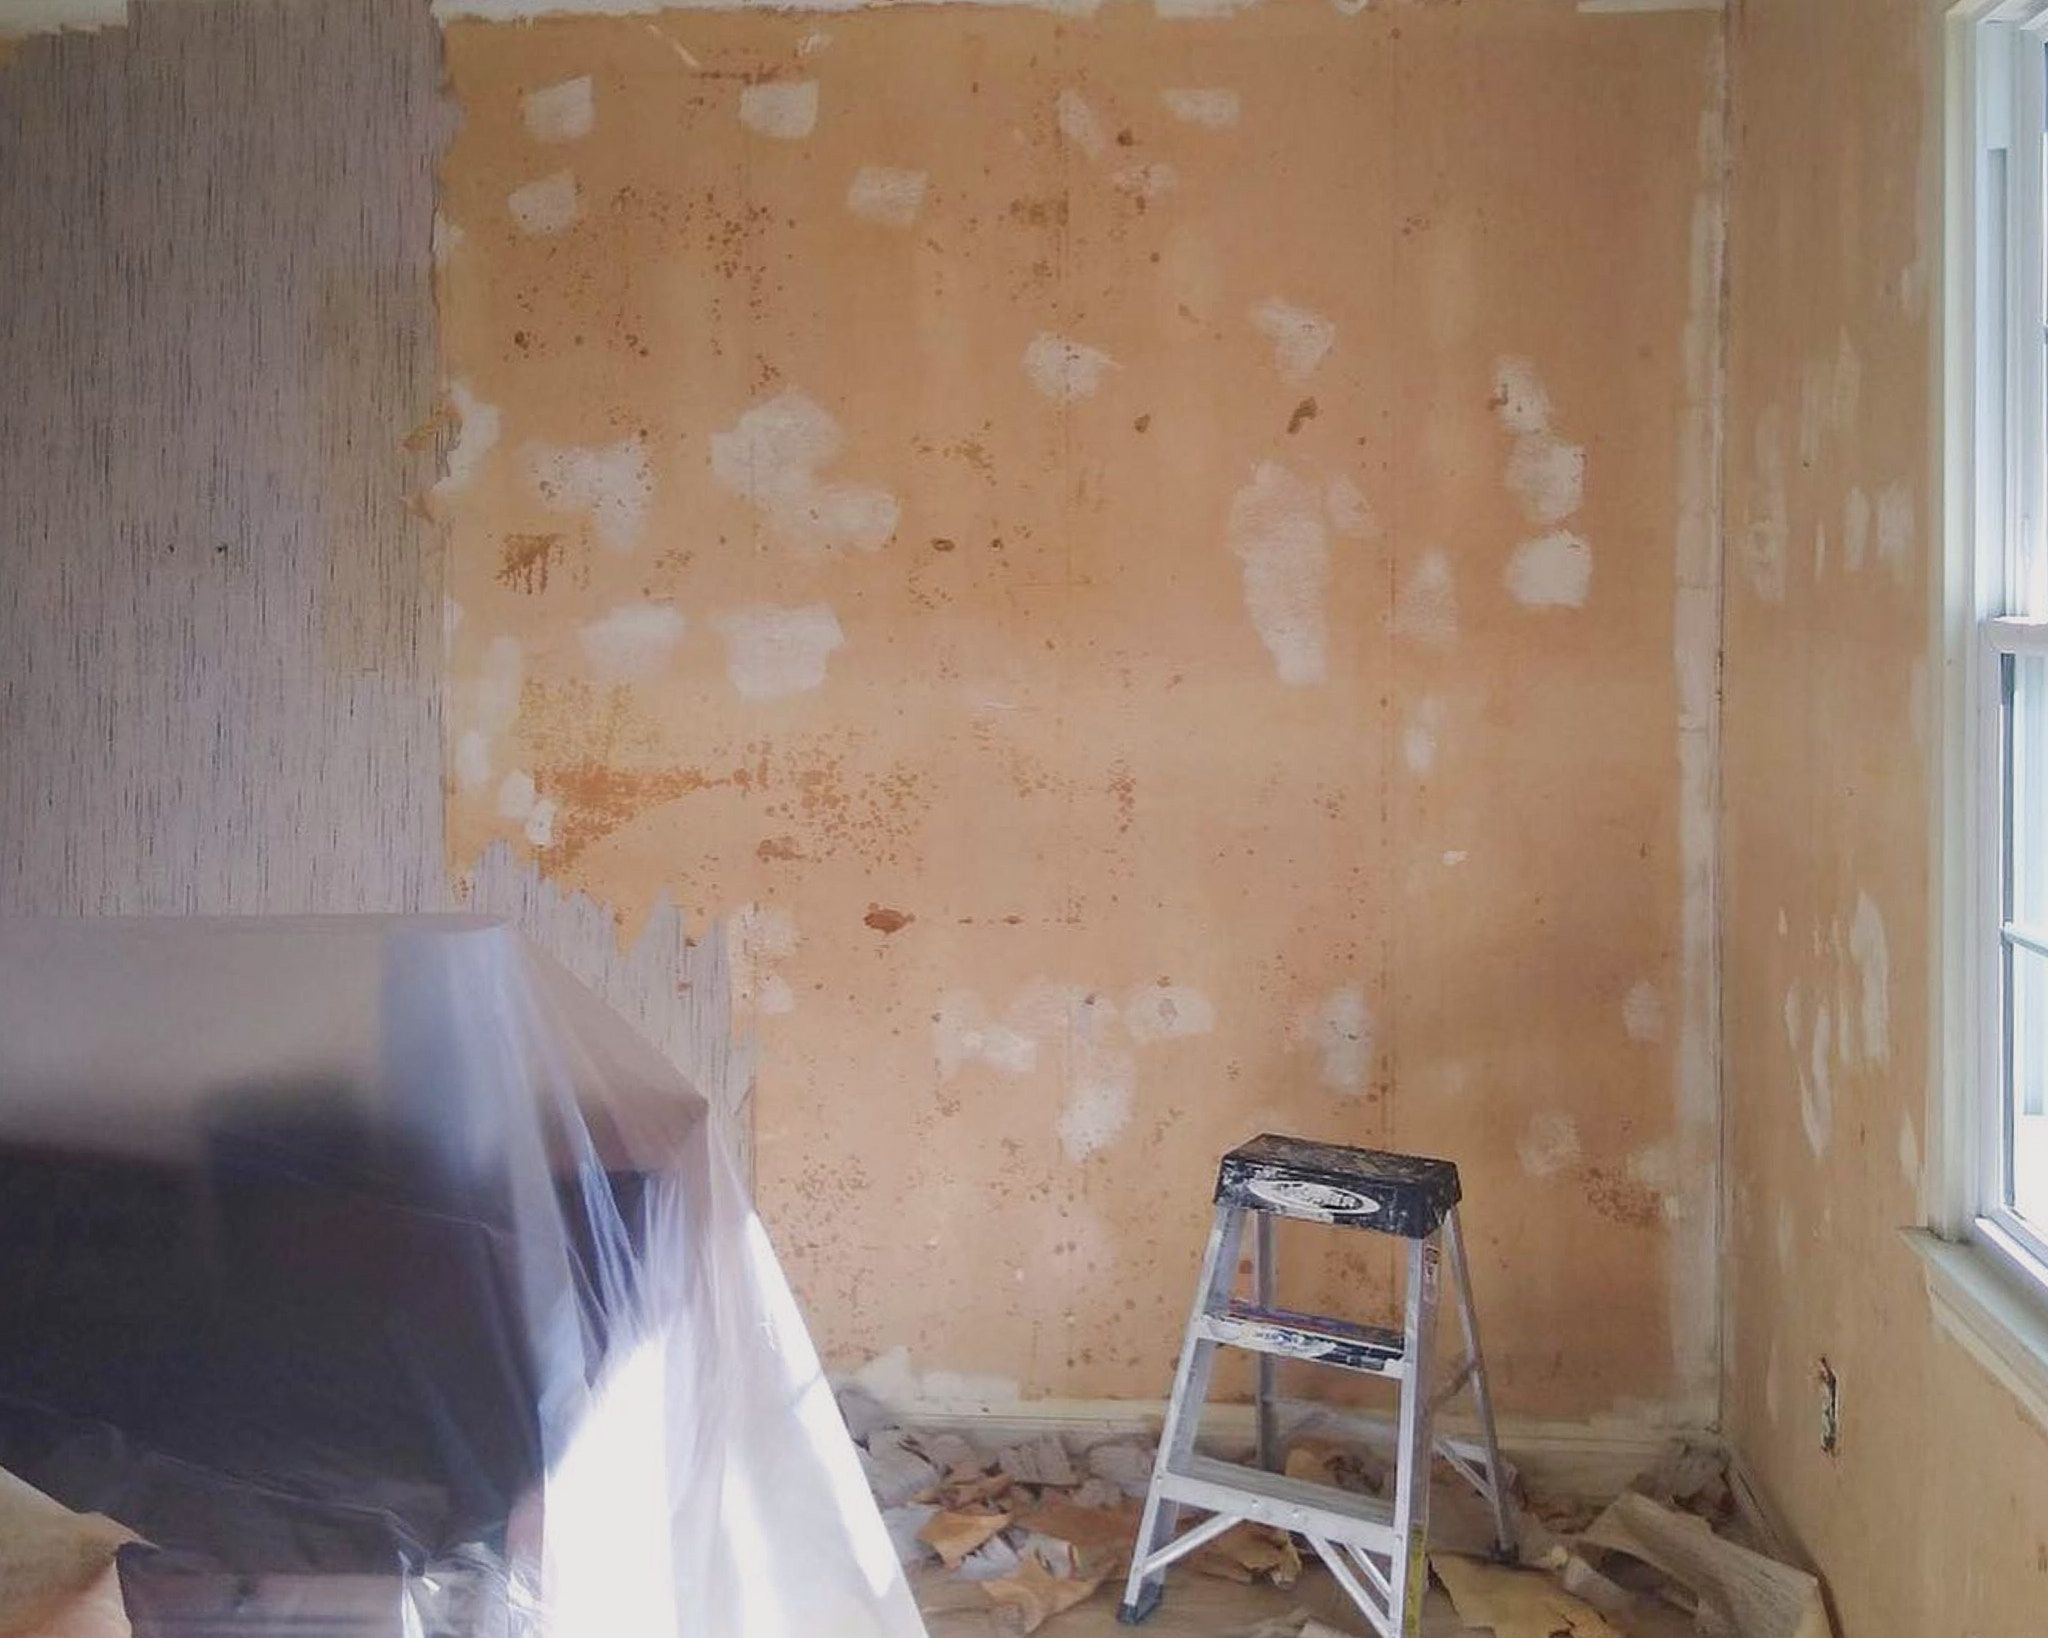 Wallpaper Removal In Residential Home